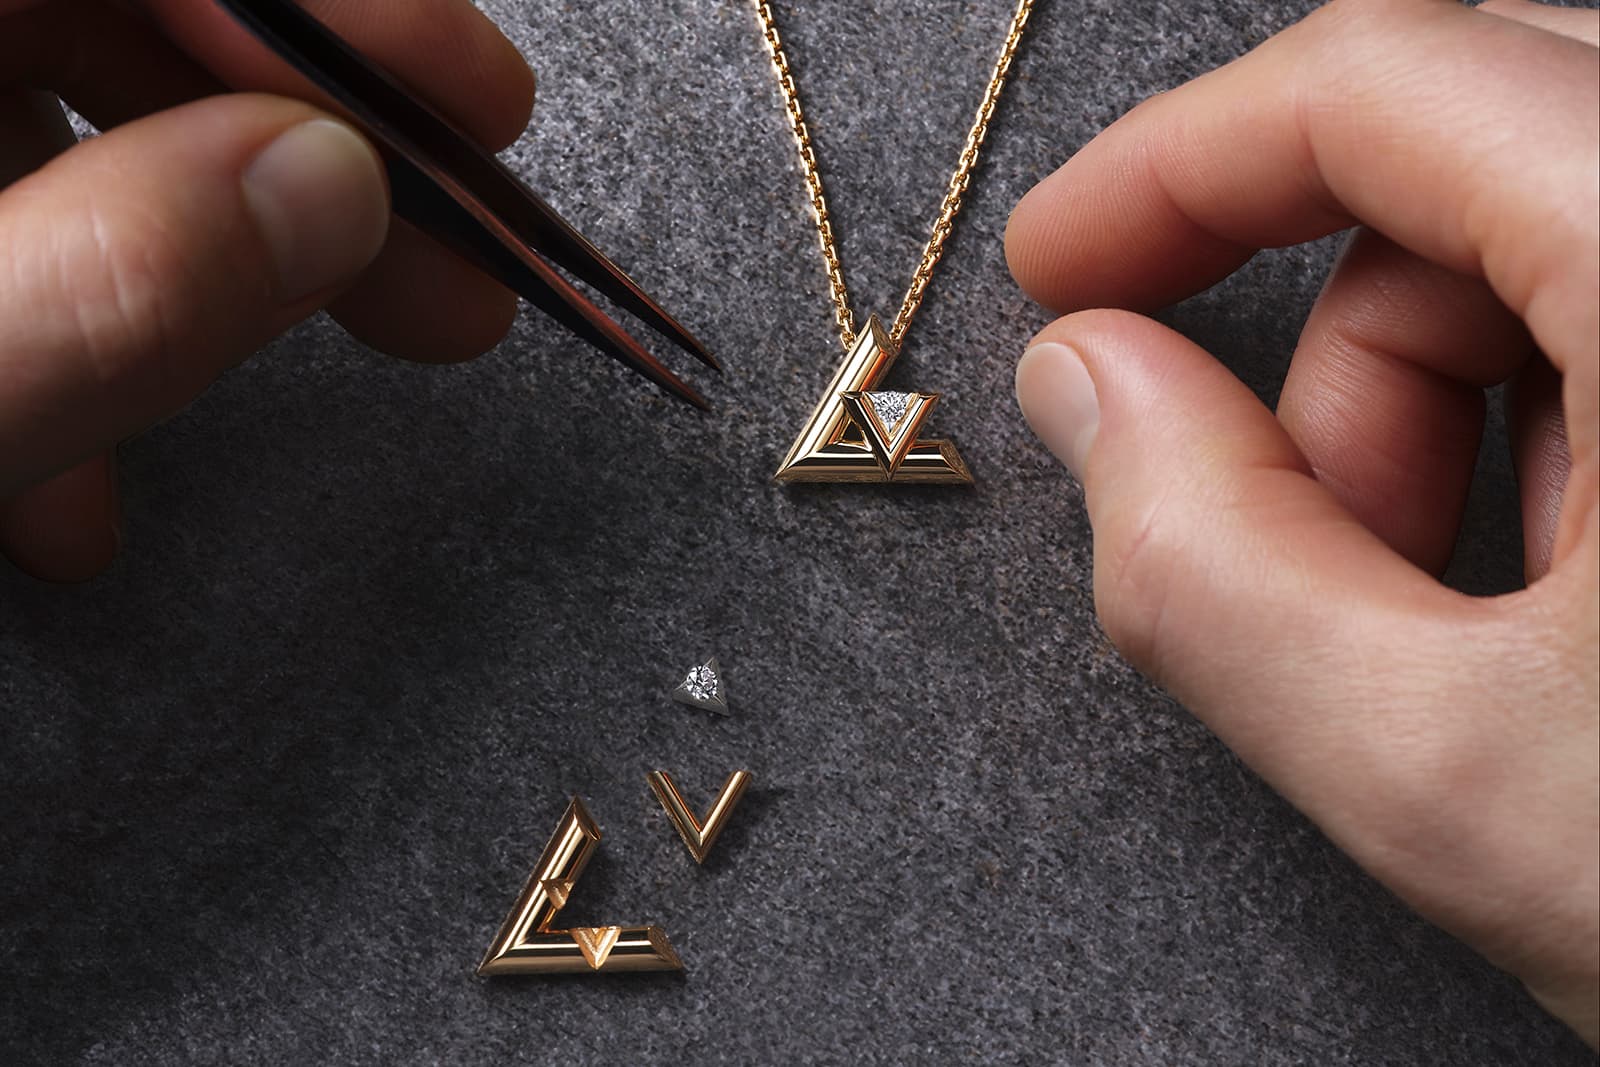 Louis Vuitton's Gender-Neutral Volt Collection Is Fine Jewelry At